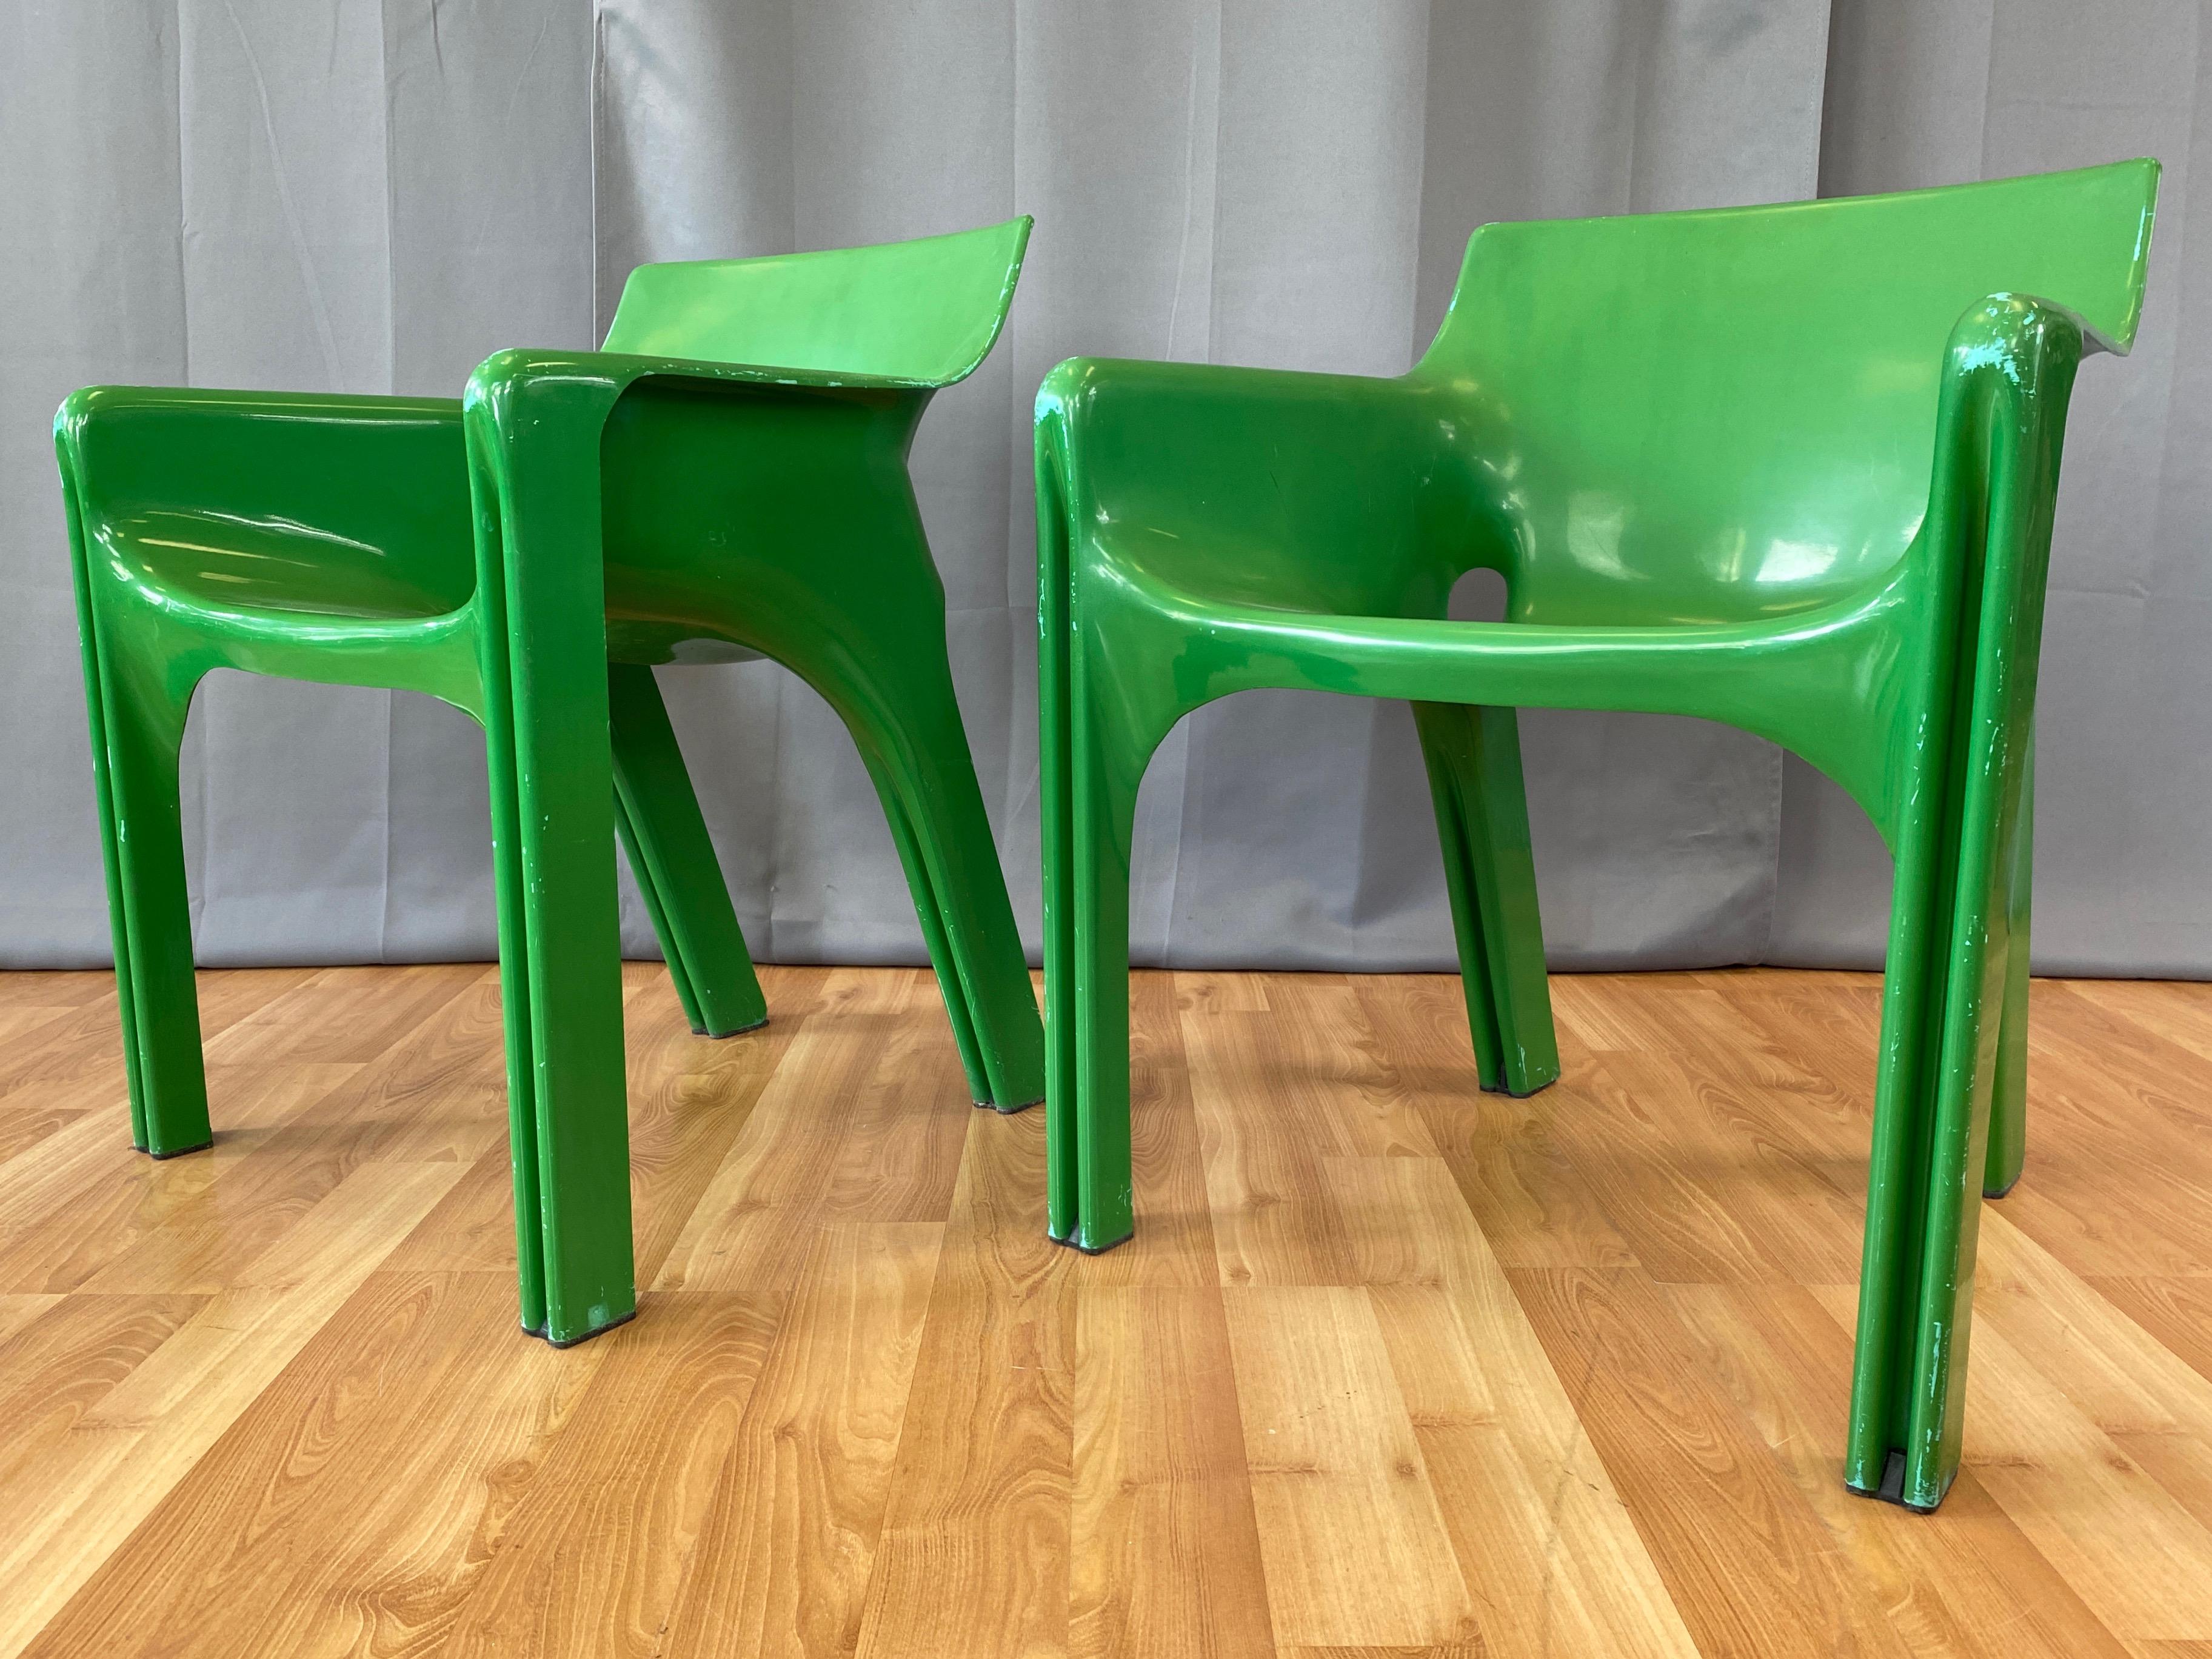 An early 1970s pair of green Gaudi armchairs by Vico Magistretti for Artemide Milano.

The 1971 Gaudi armchair evolved out of the design of the 1968 stackable Selene chair, both of which are included in the permanent collection of the Museum of